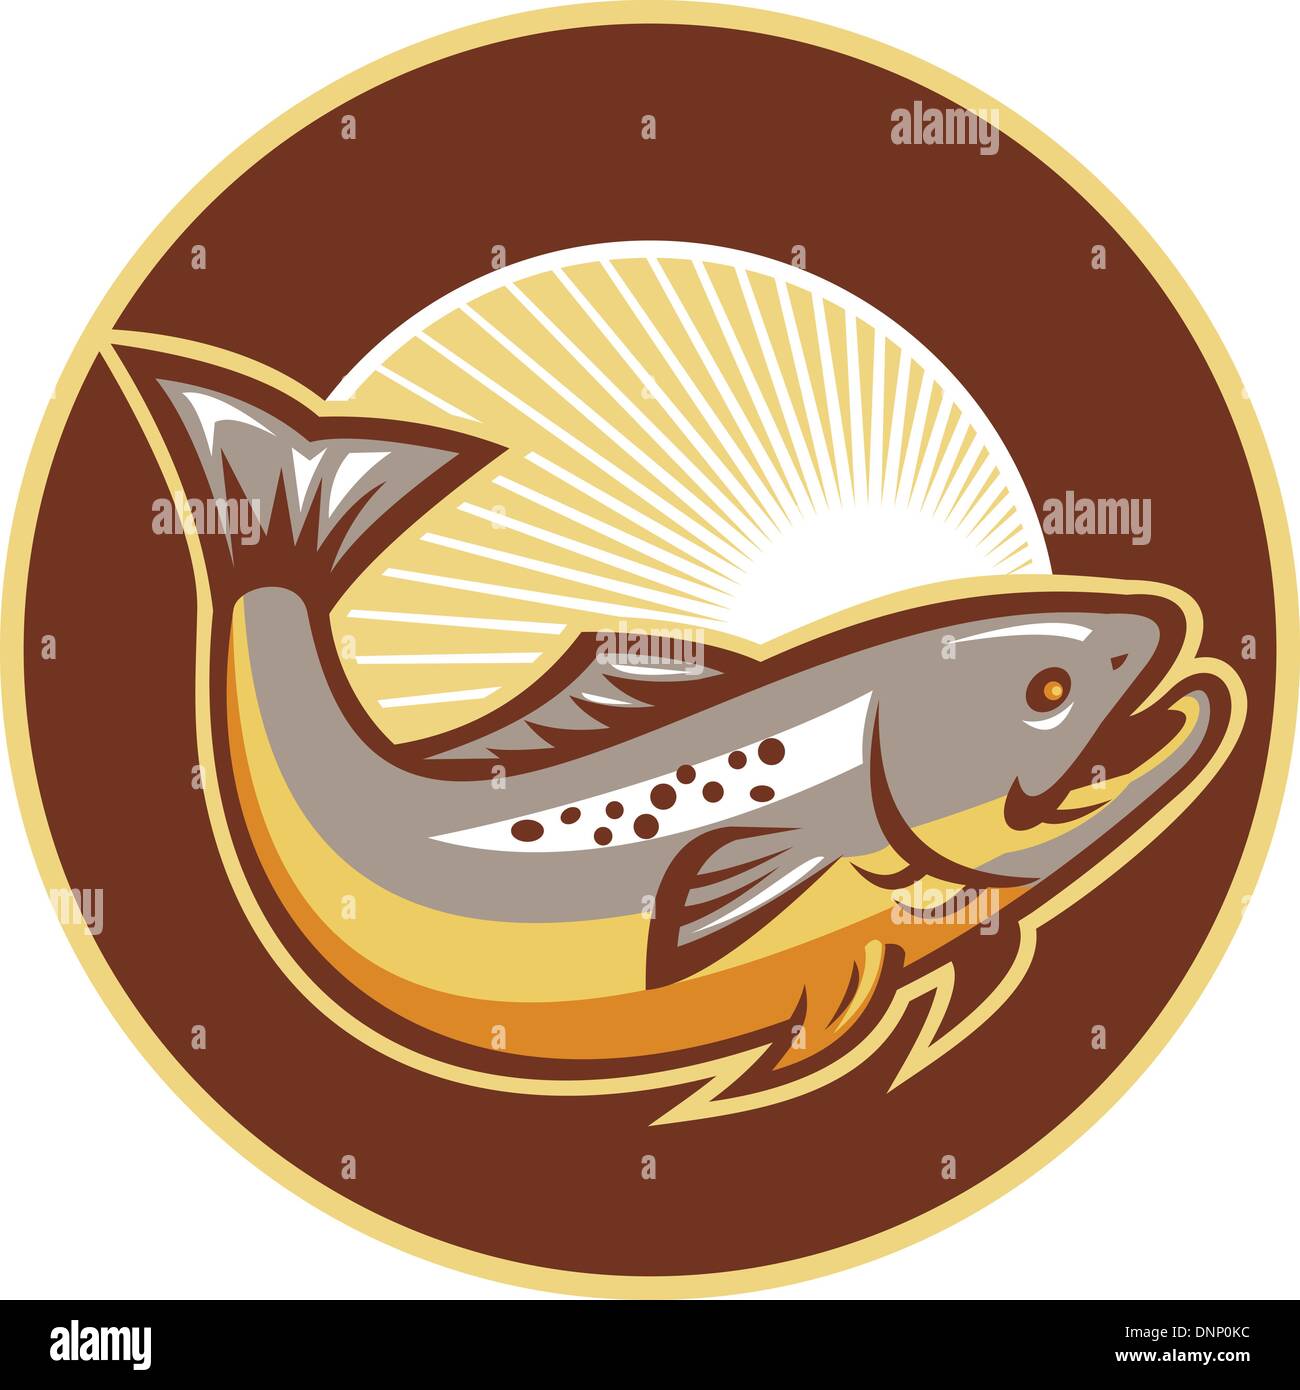 Illustration of a trout fish jumping set inside circle with sunburst in background done in retro style. Stock Vector